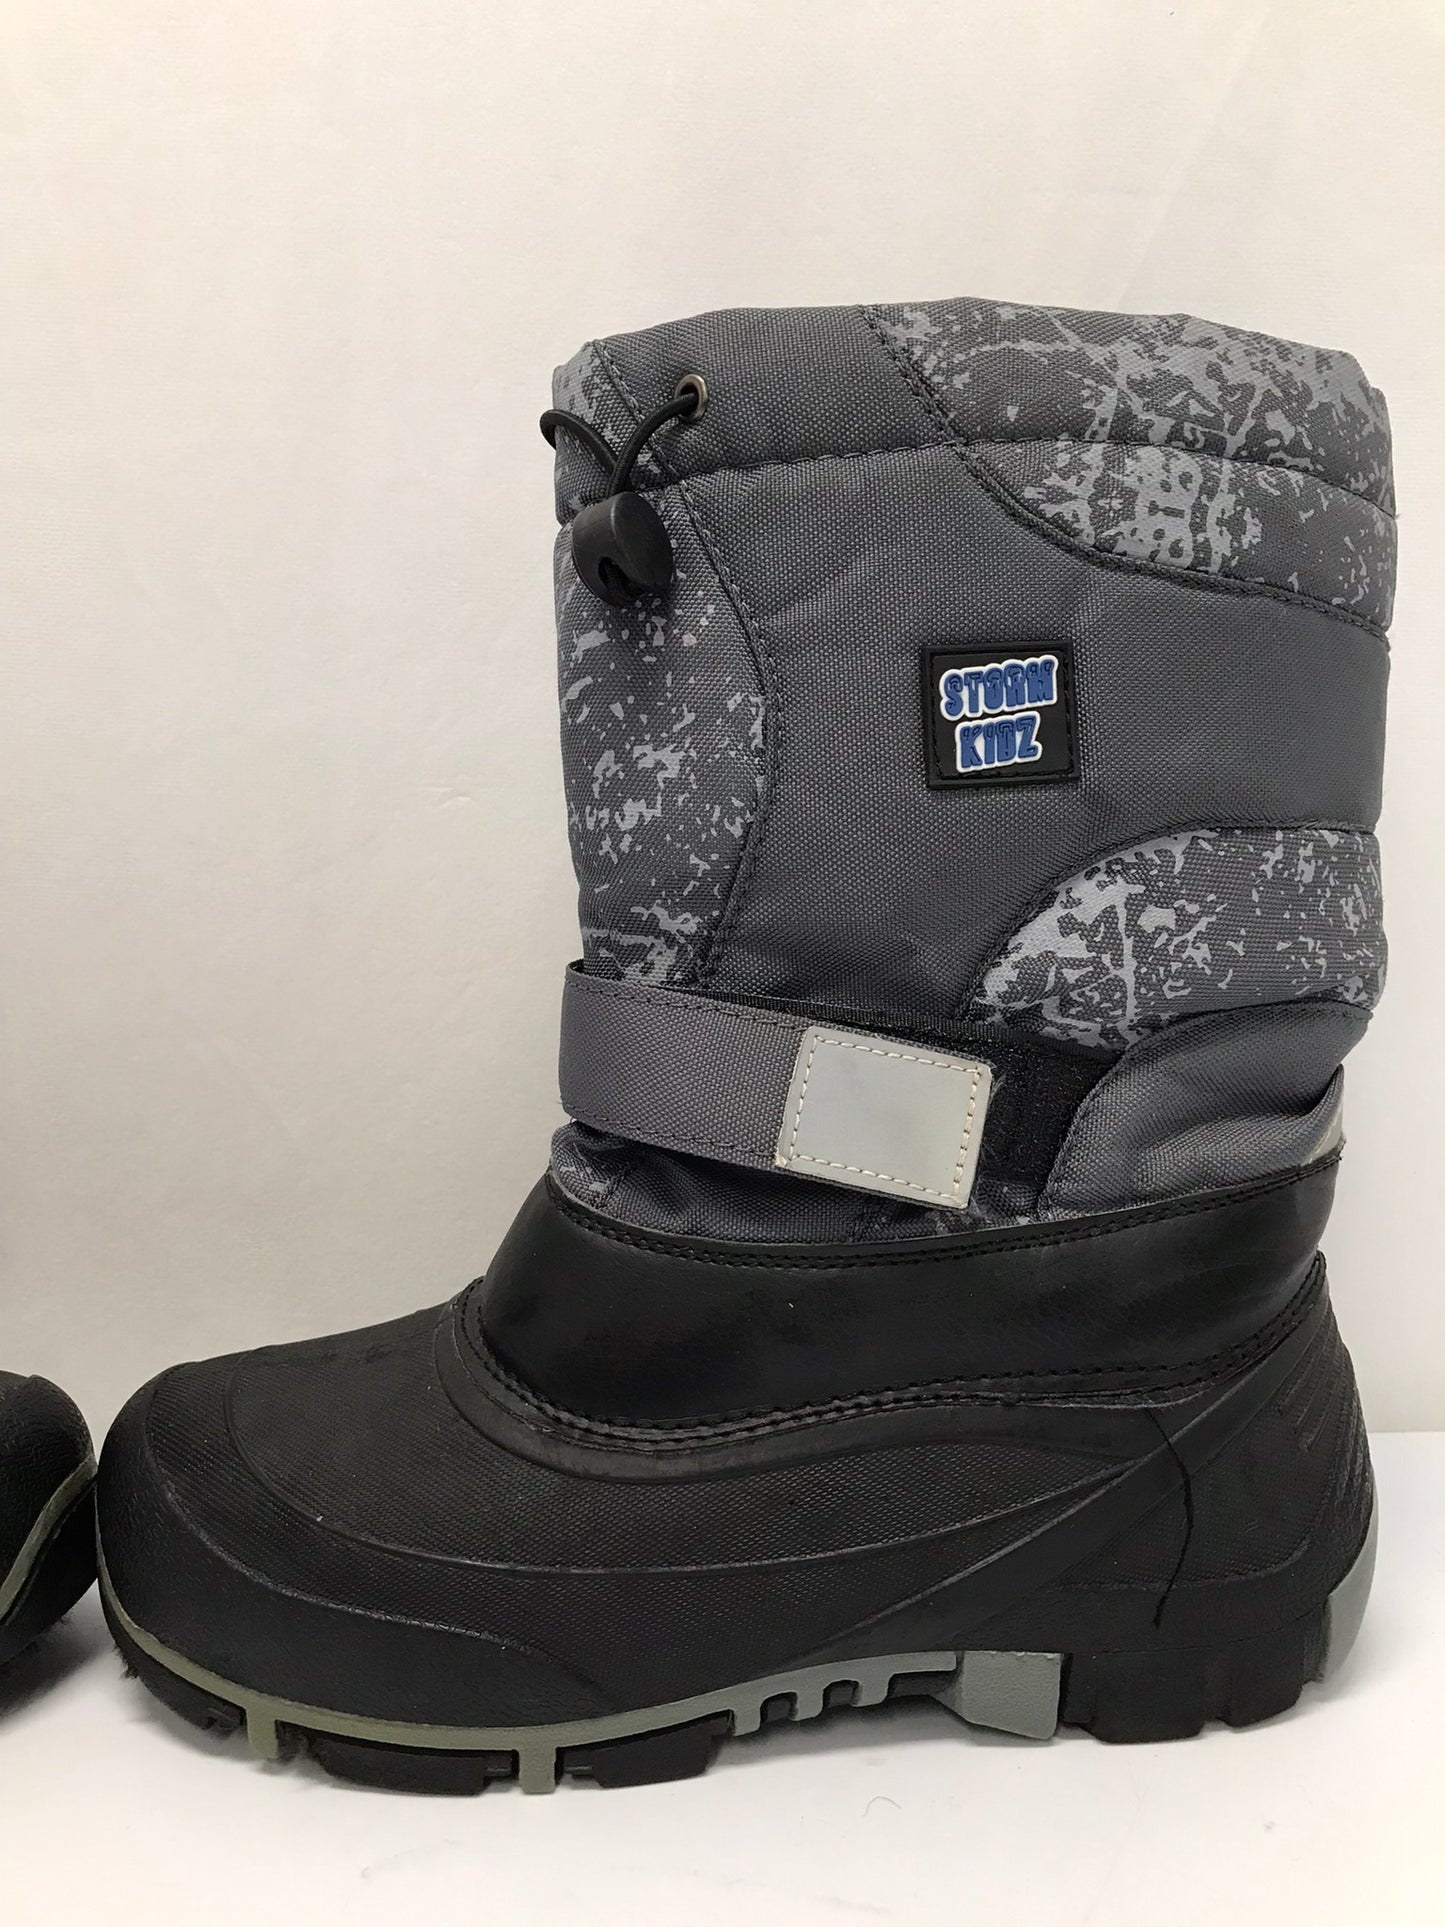 Winter Boots Child Size 6 Youth Storm Grey Black With Liner Excellent  As New